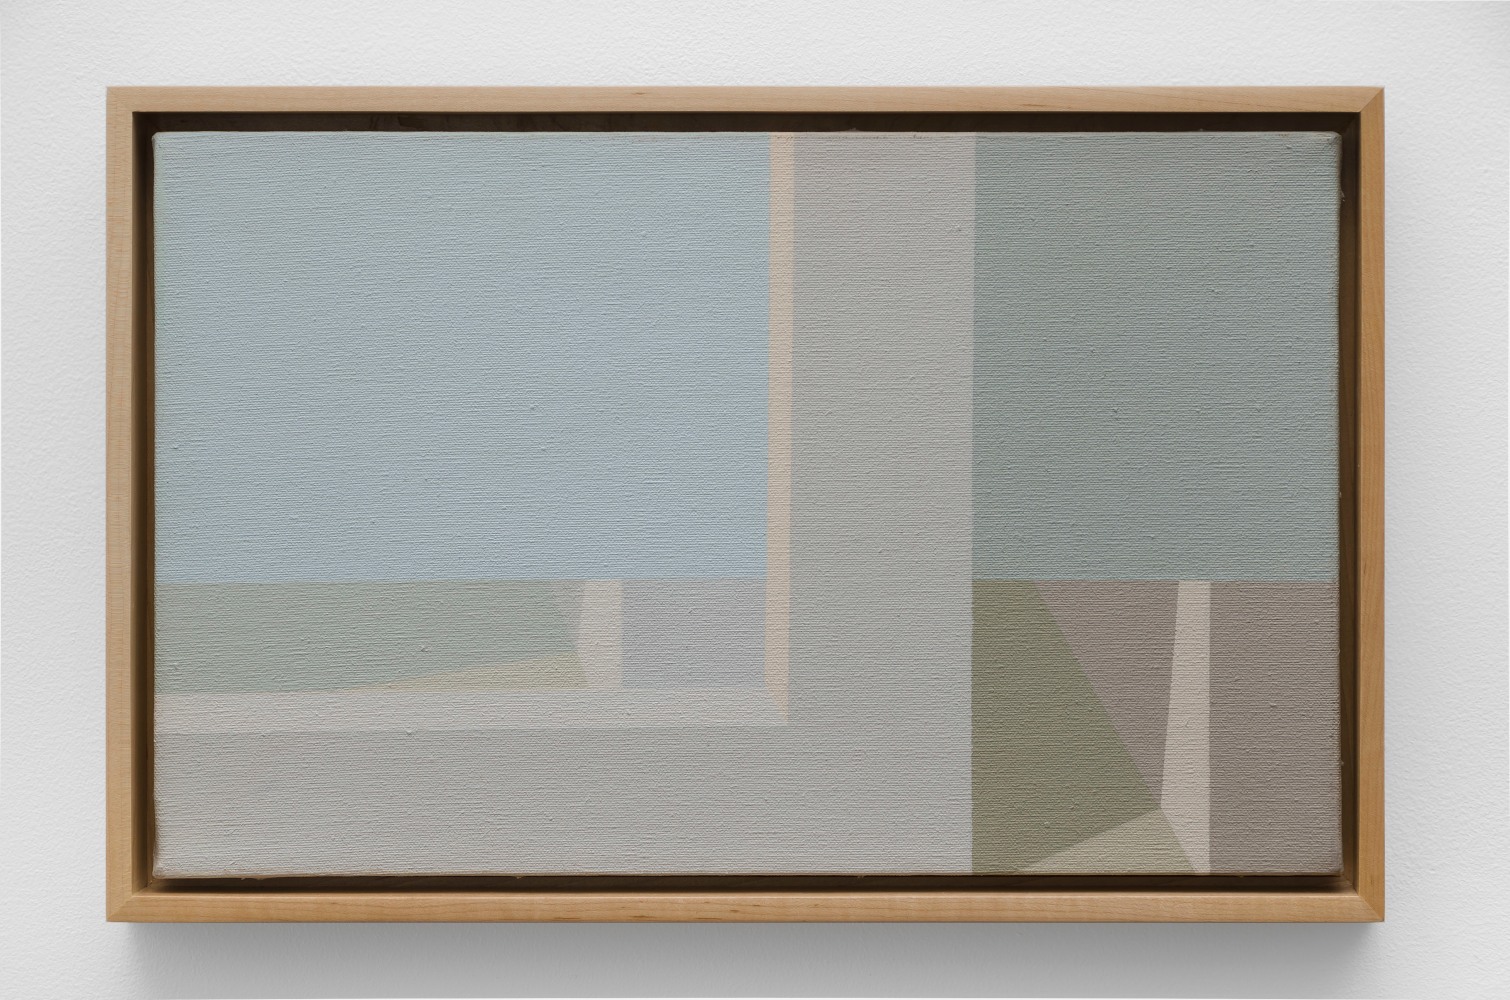 Helen Lundeberg (1908-1999) Double View, 1973 acrylic on canvas 10 x 16 inches; 25.4 x 40.6 centimeters ​LSFA# 10508